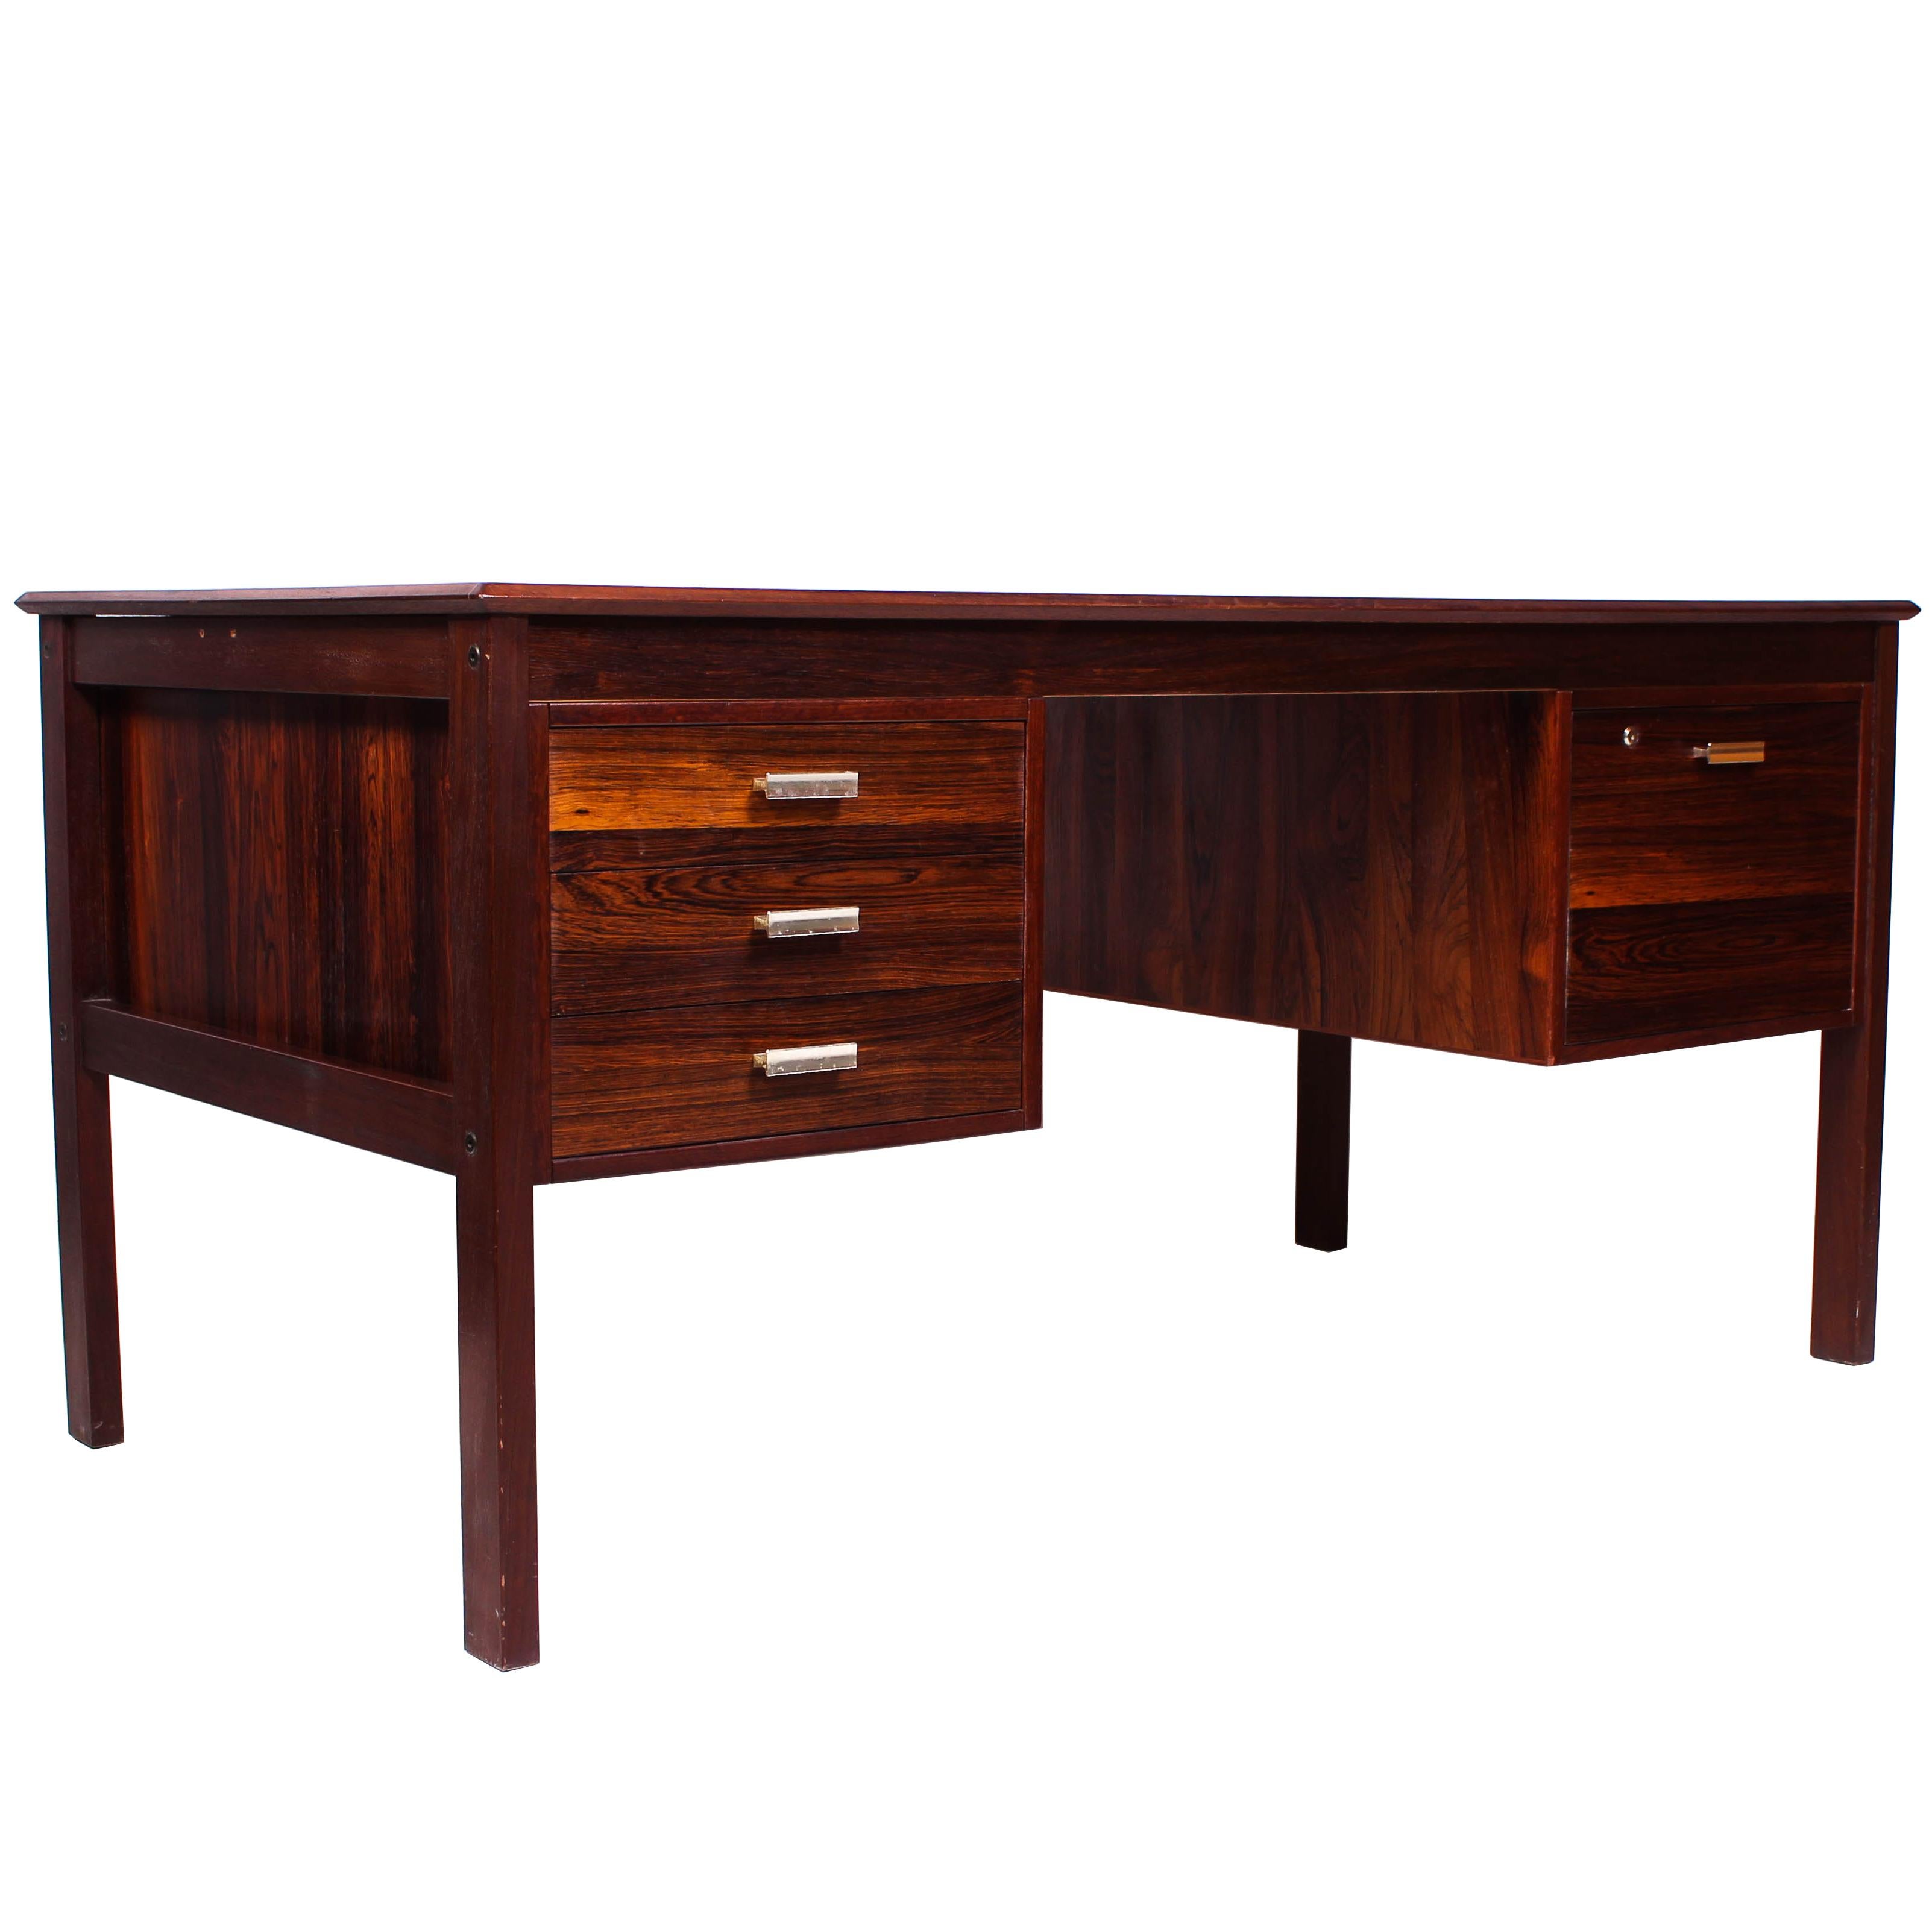 A midcentury rosewood desk by unknown designer. The desk is of high quality with a veneered back so that it can be placed in an open space as well as against a wall. 

Very good vintage condition with signs of usage consistent with age and use.